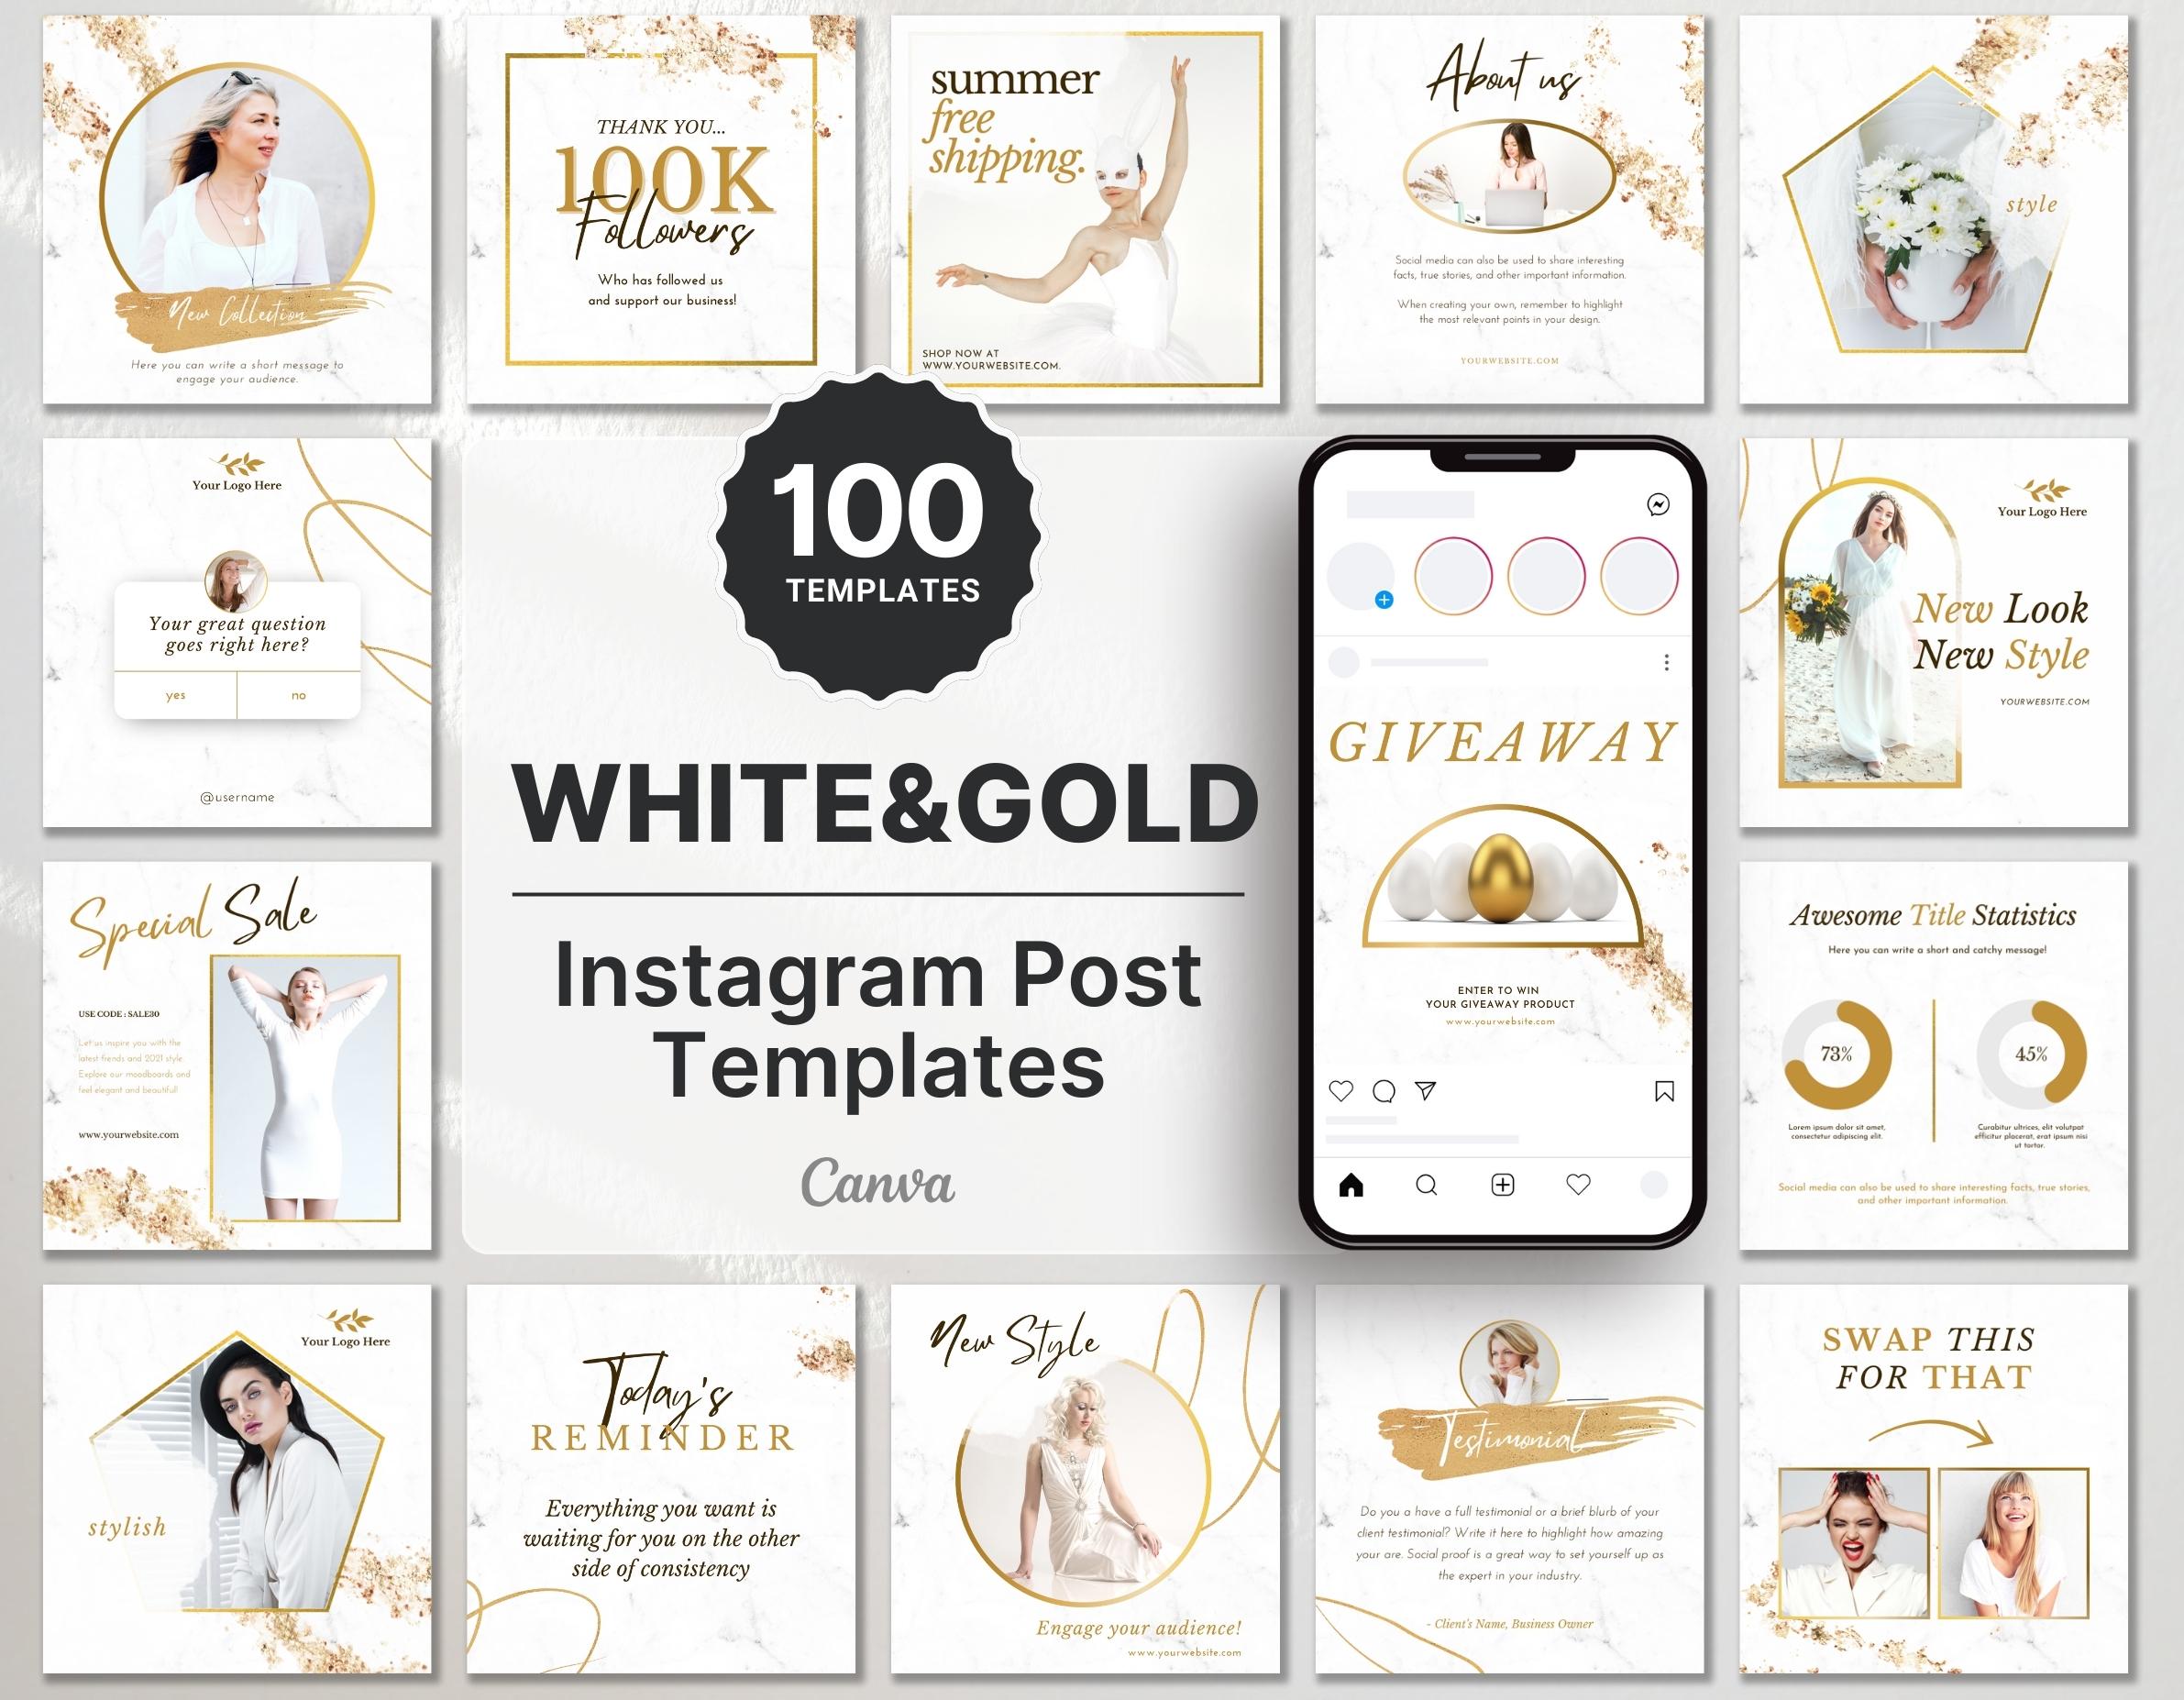 Instagram Post Templates White & Gold Cover mockup